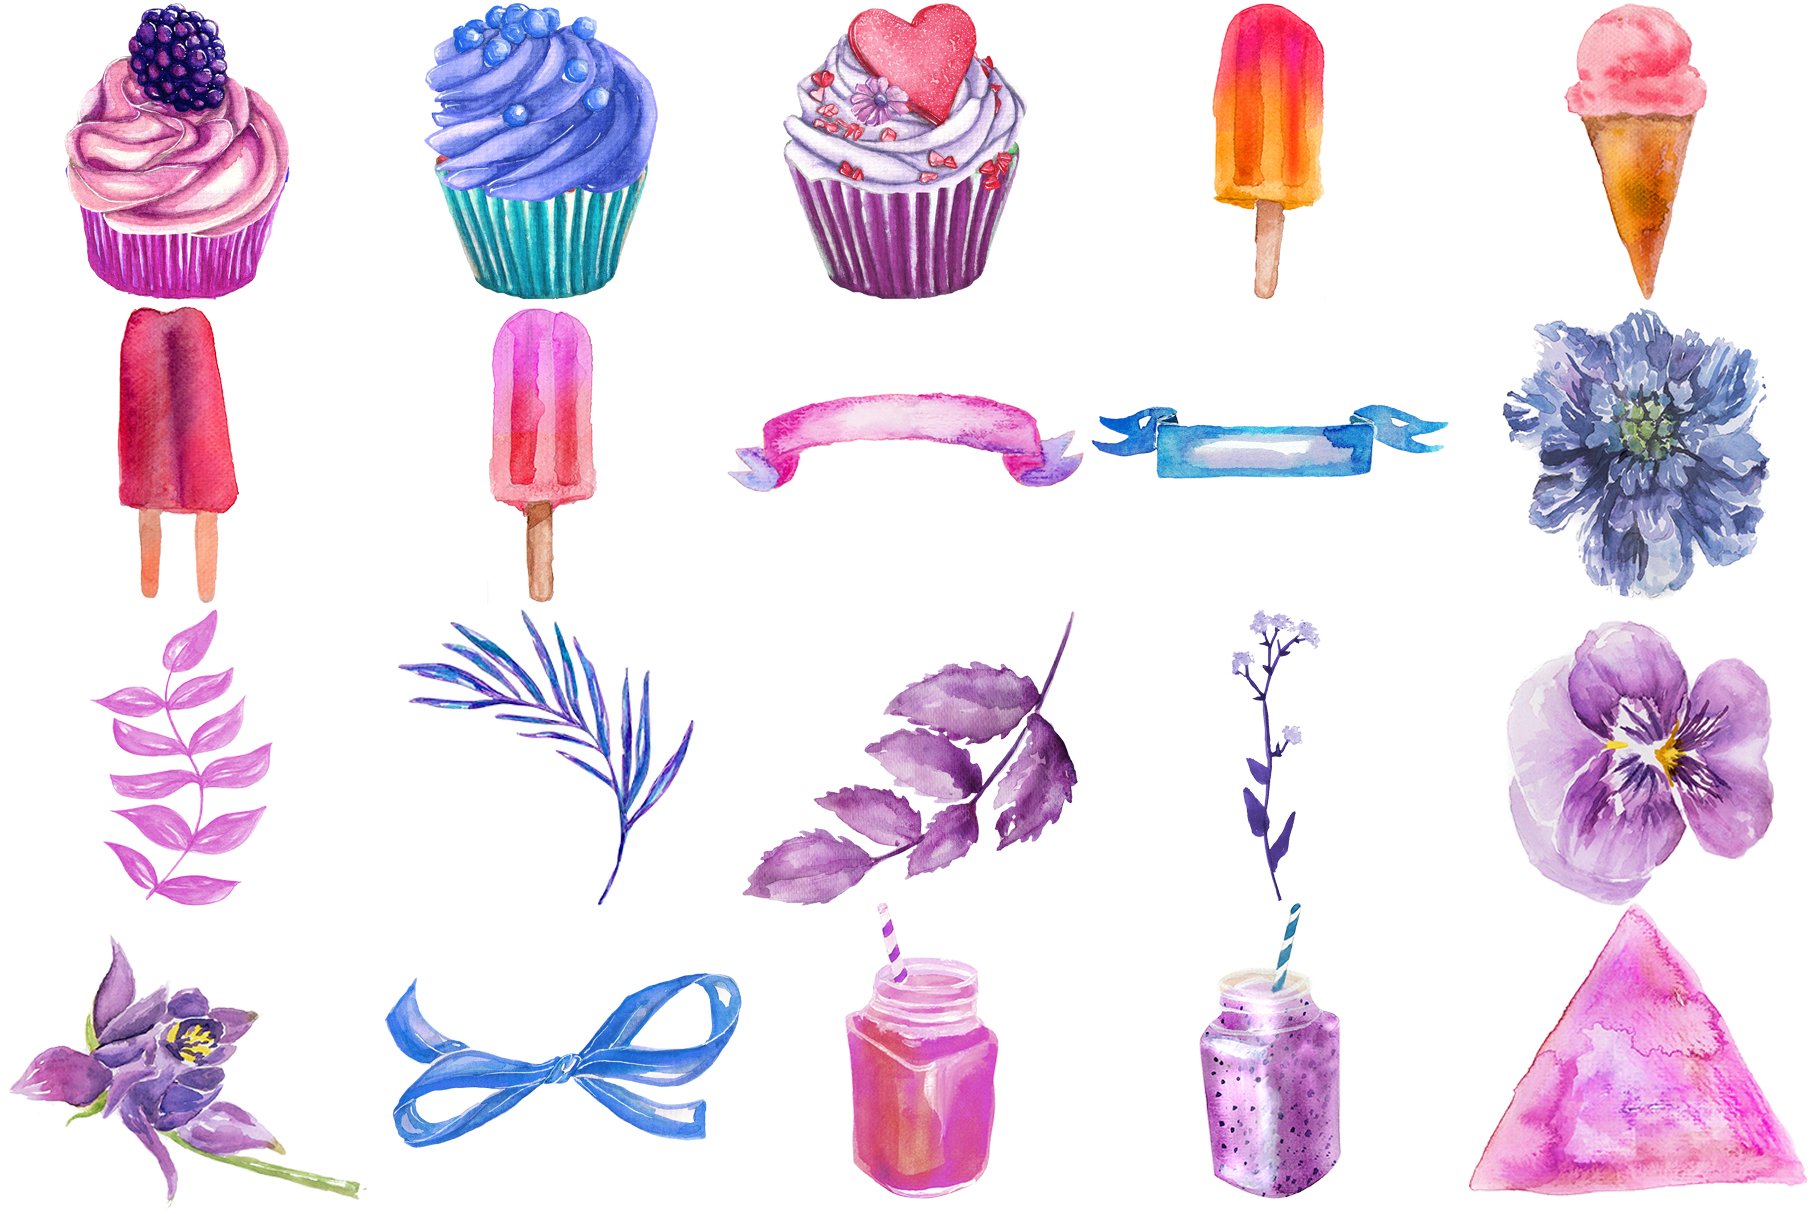 Some colorful watercolor elements to decor your desserts.